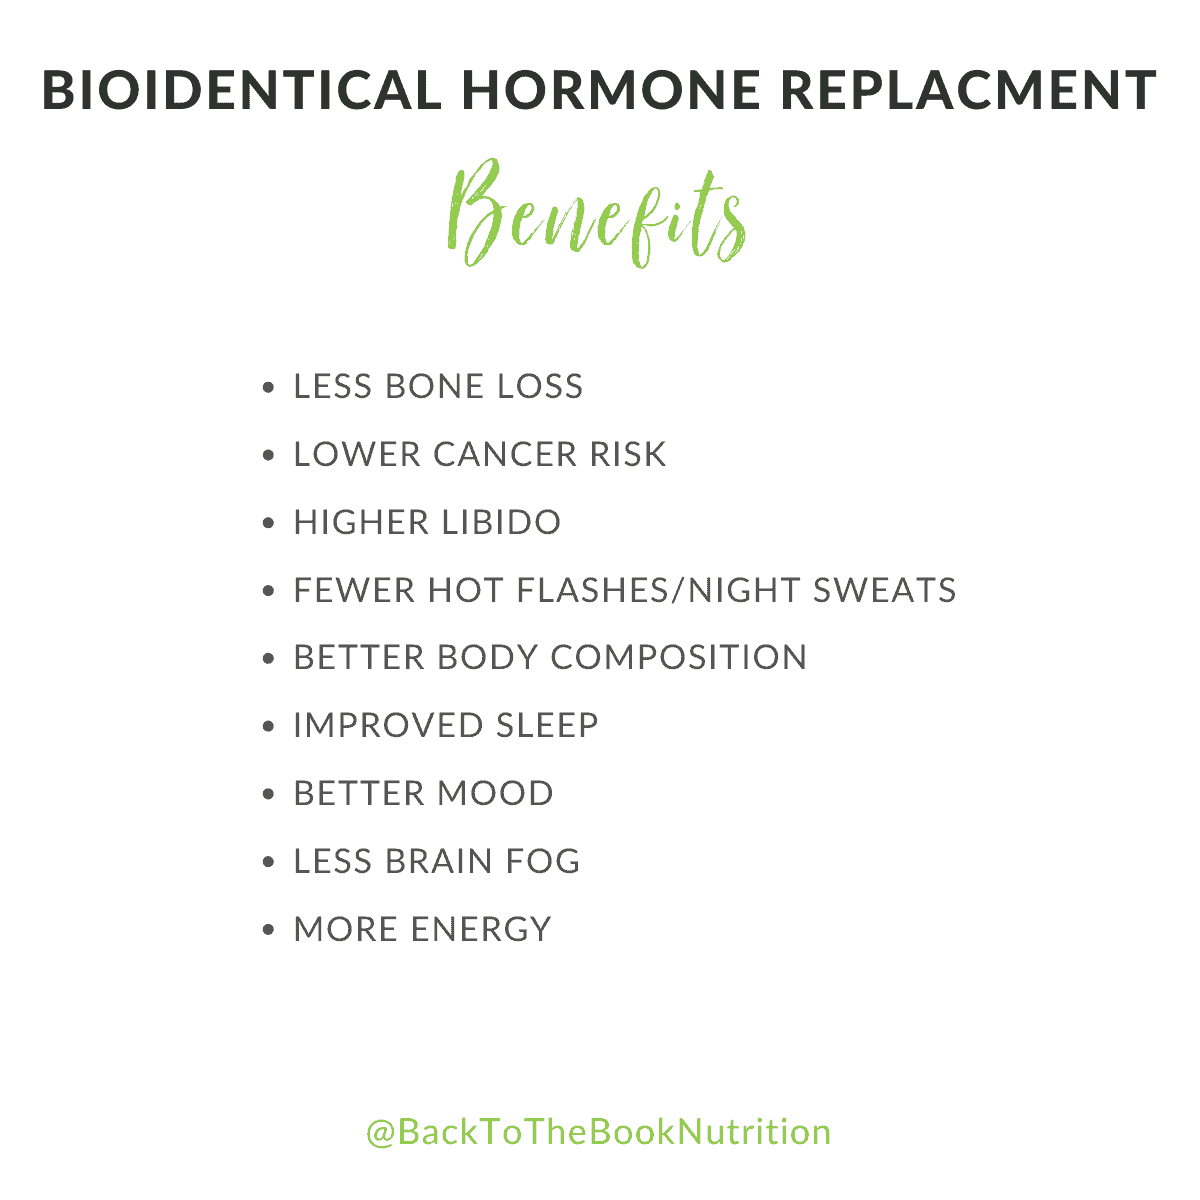 graphic listing top benefits of bioidentical hormone replacement therapy during perimenopause and menopause